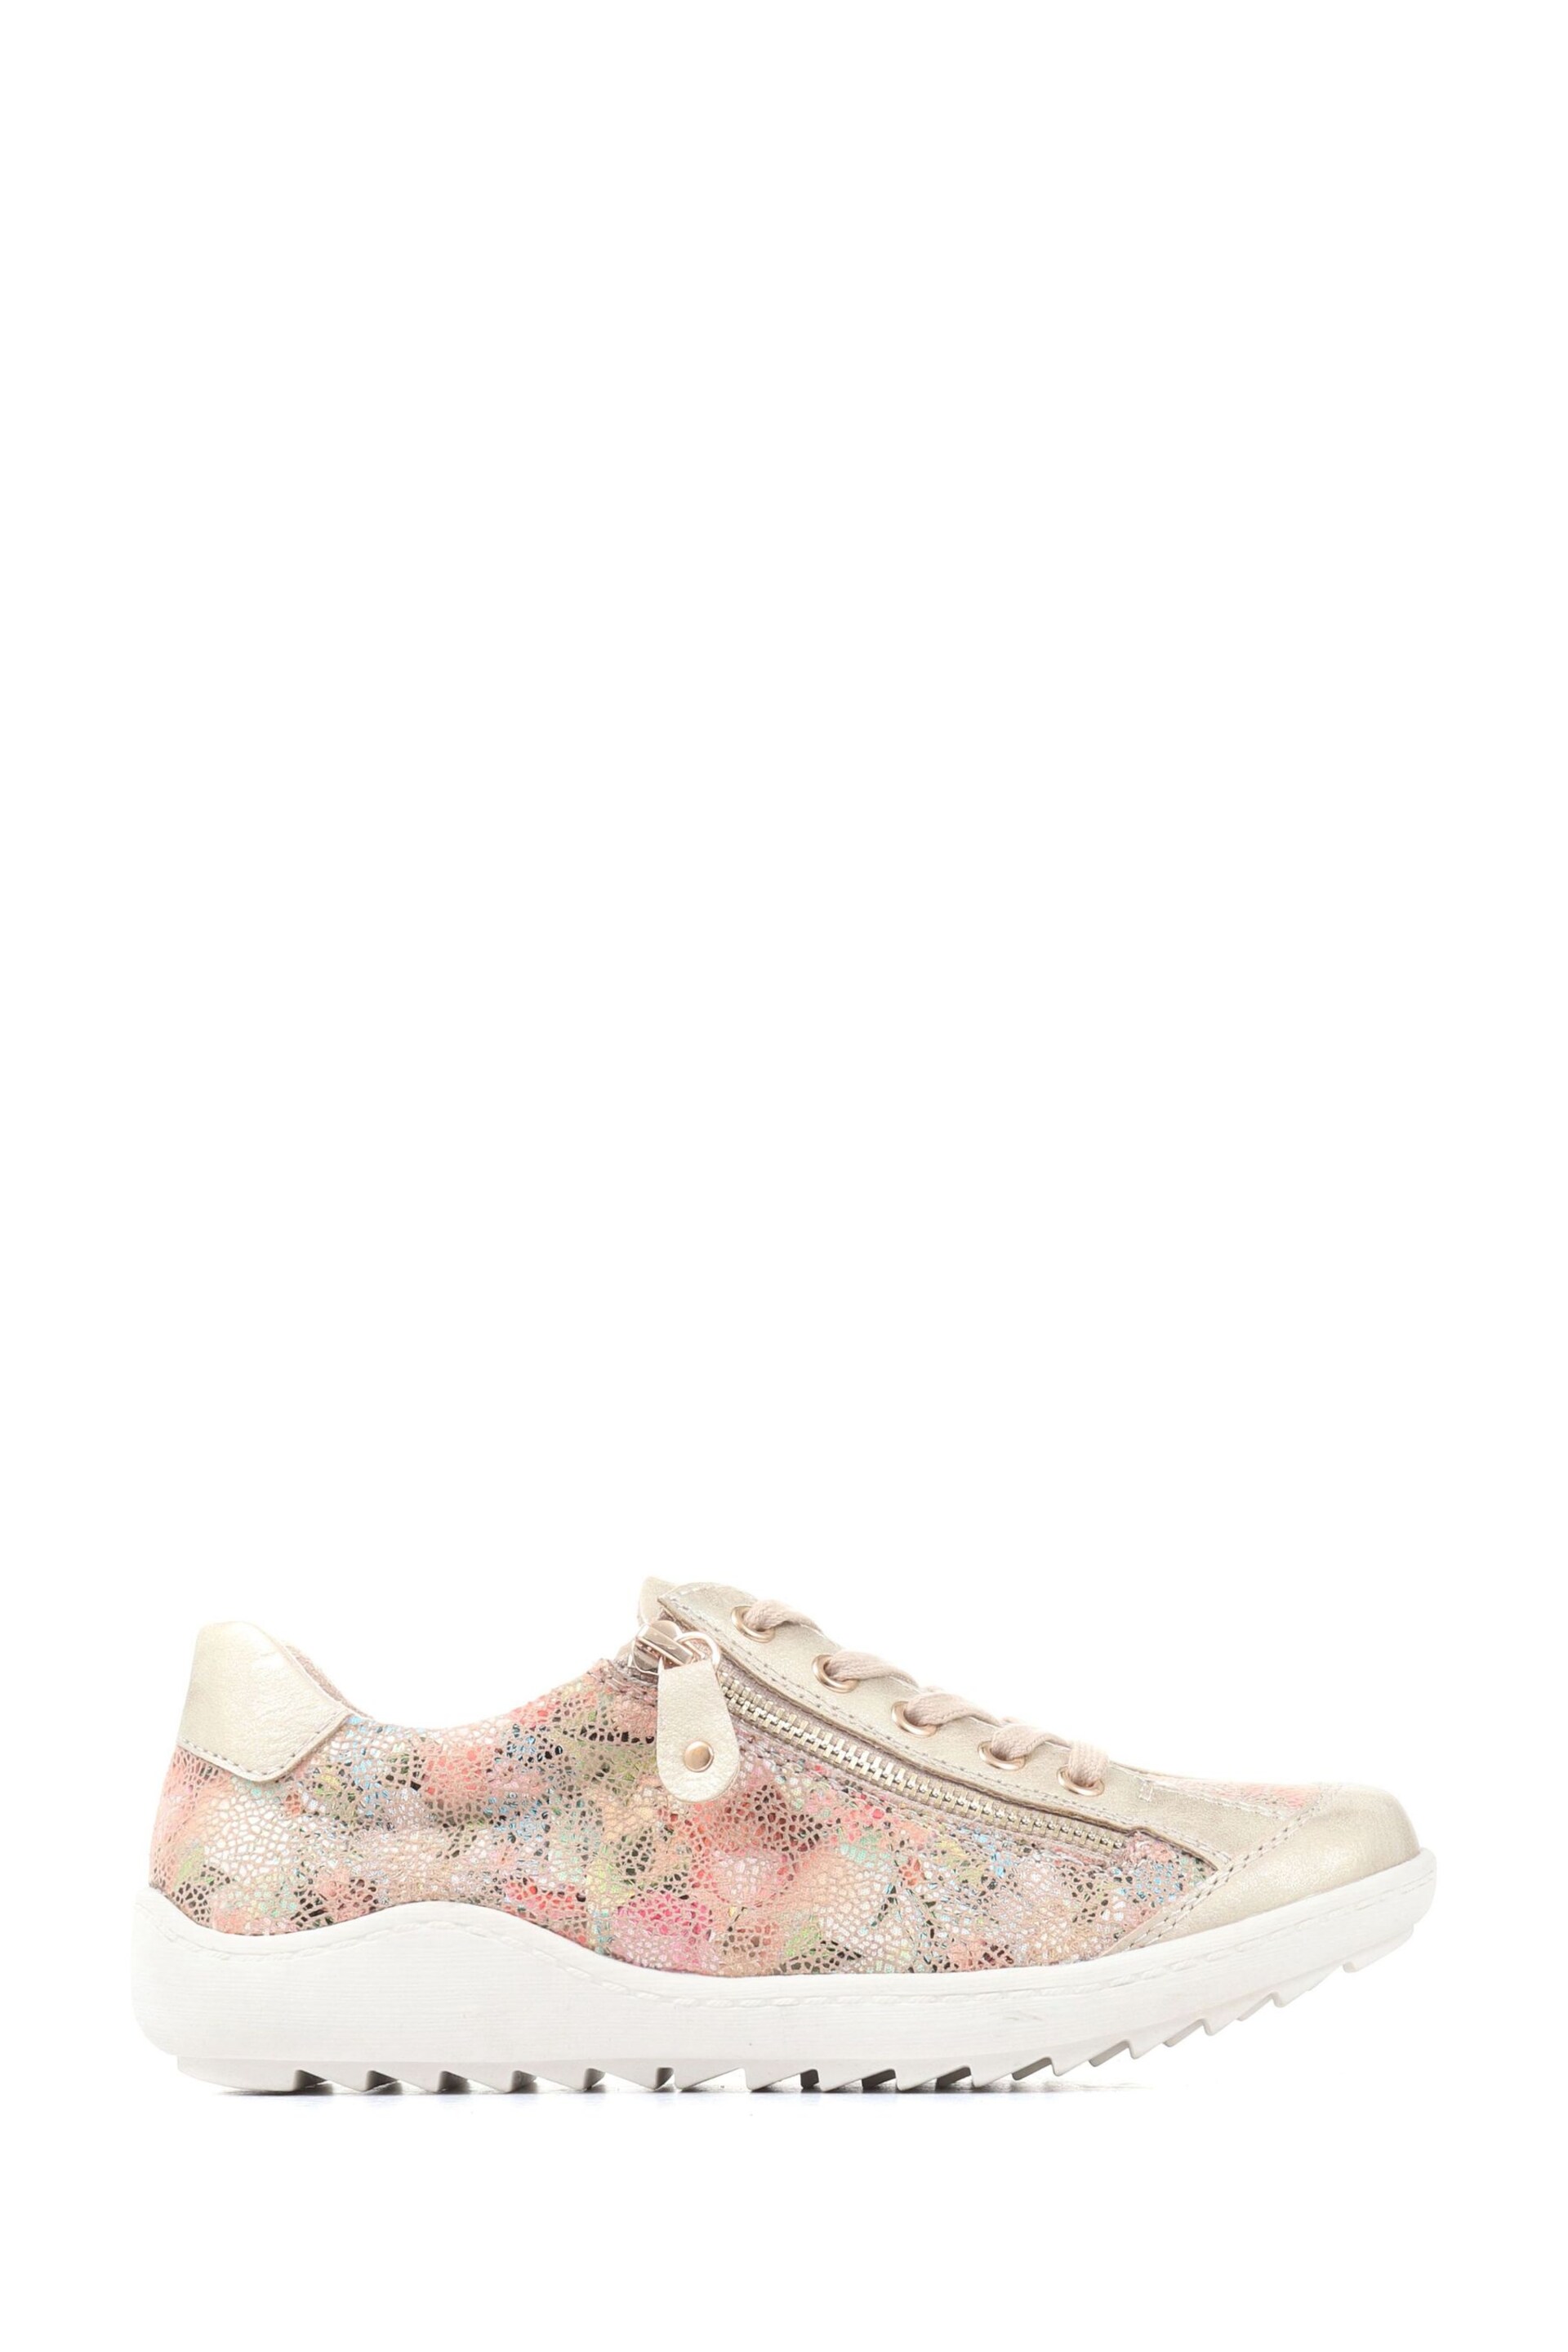 Pavers Gold Floral Lace-Up Trainers - Image 1 of 5